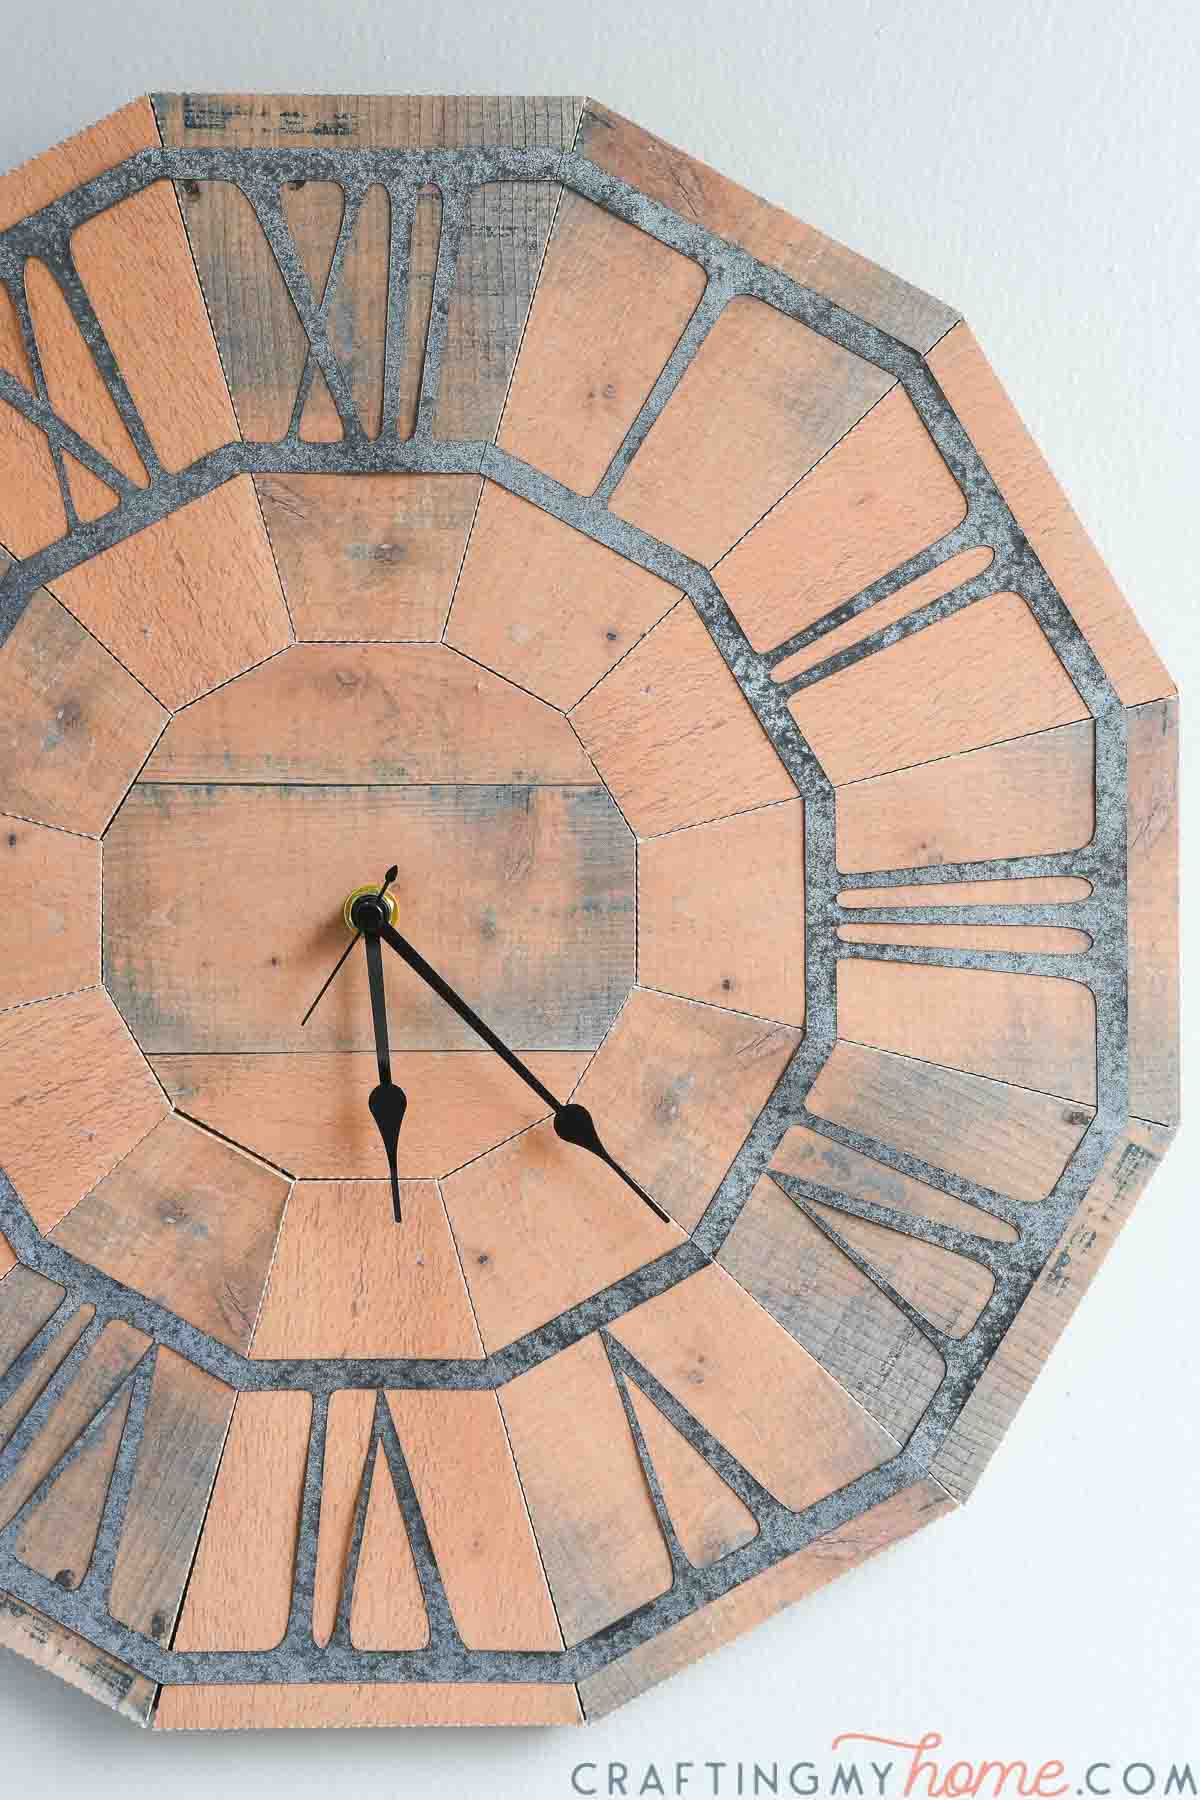 Rustic wall clock made hanging on a pale gray wall.